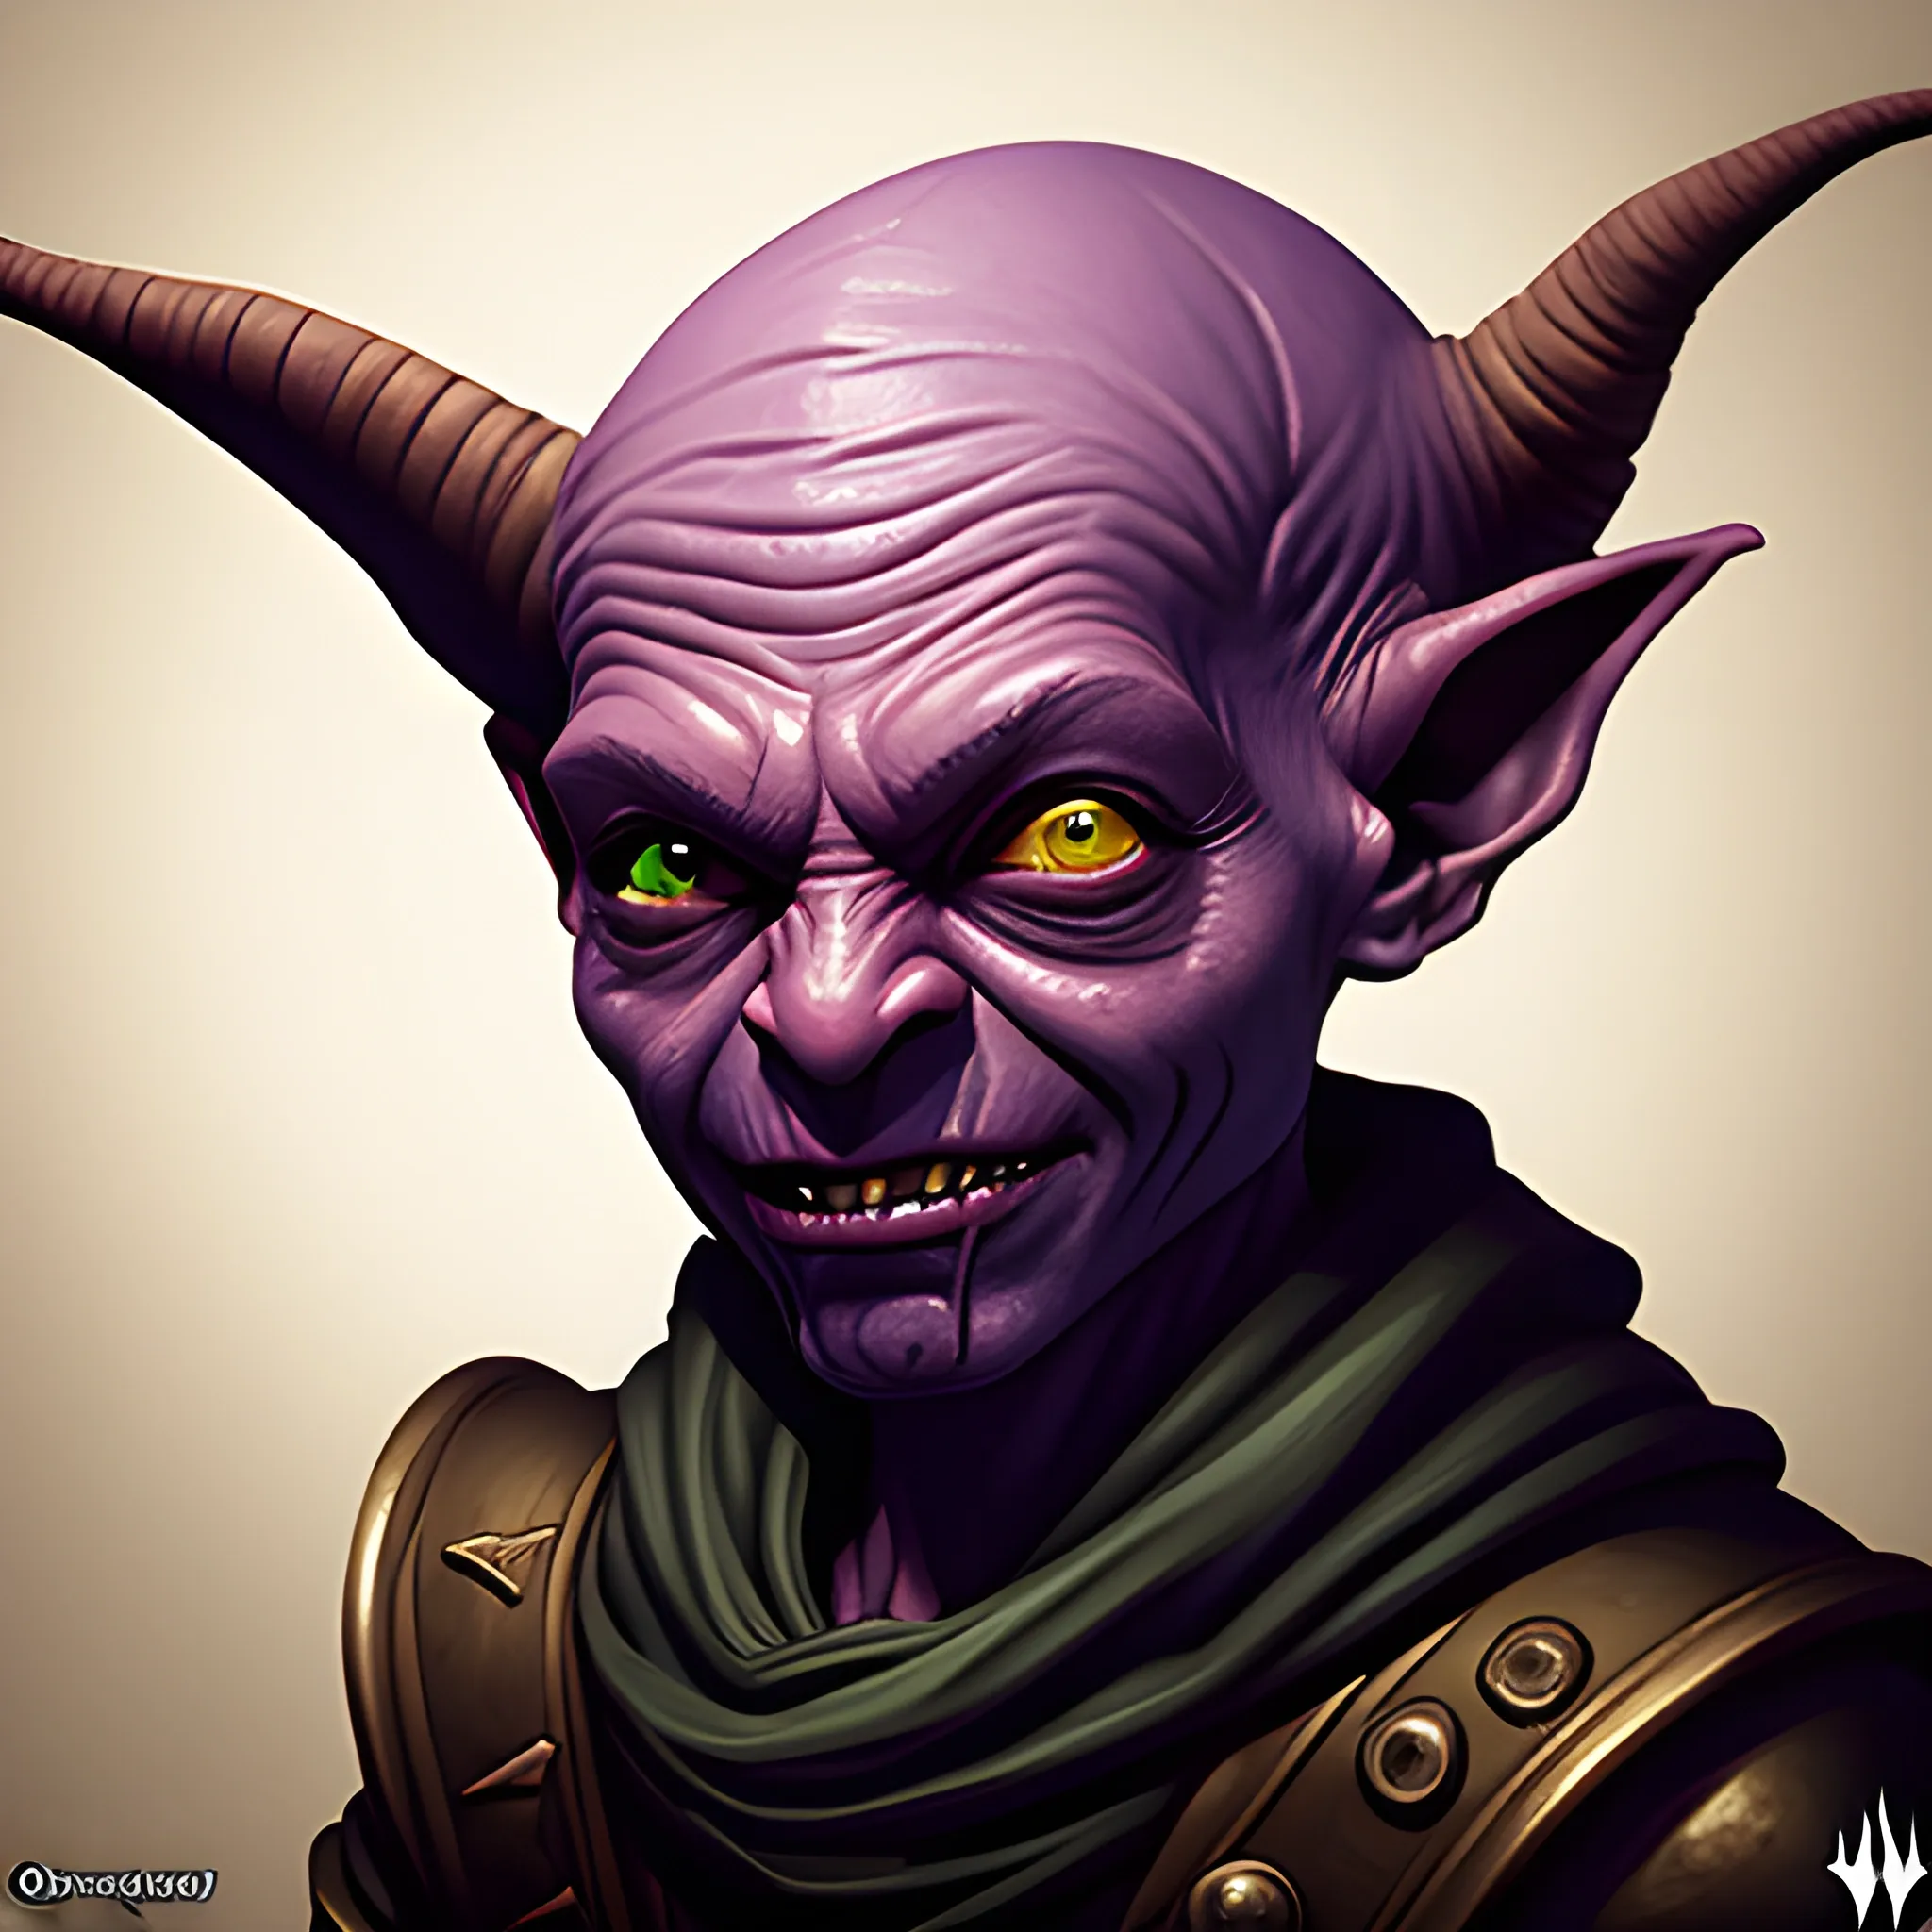 Magic the gathering art style, realistic evil goblin rogue